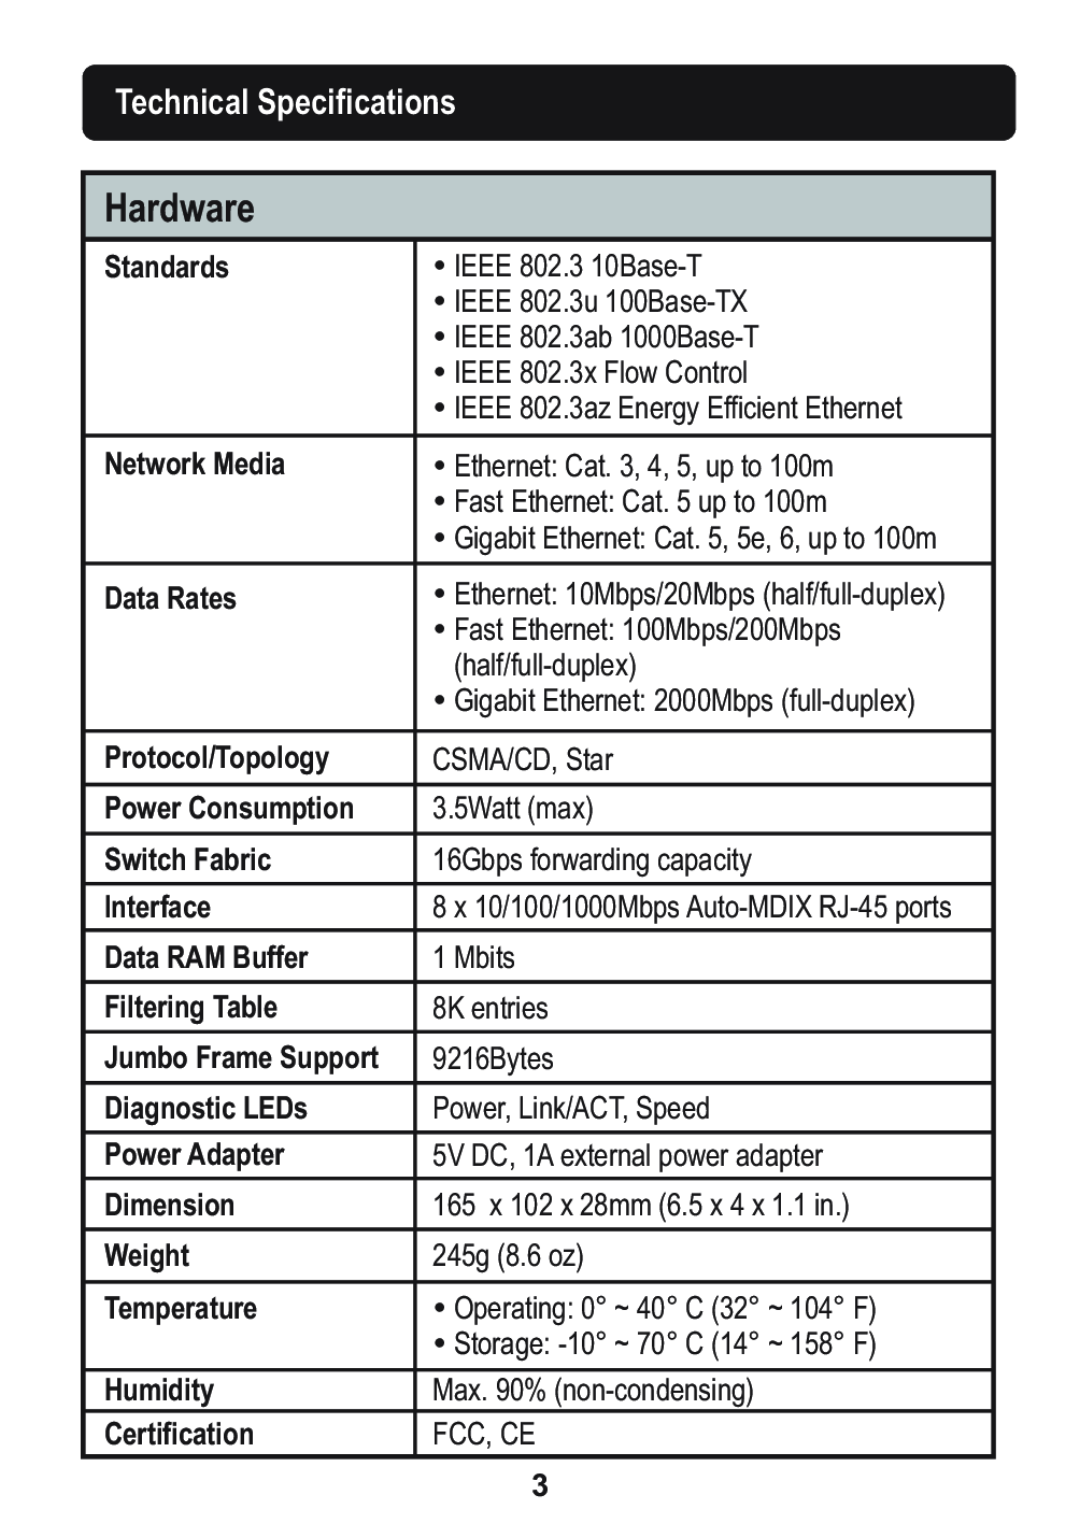 TRENDnet WAG102NA technical specifications Technical Specifications, Hardware 